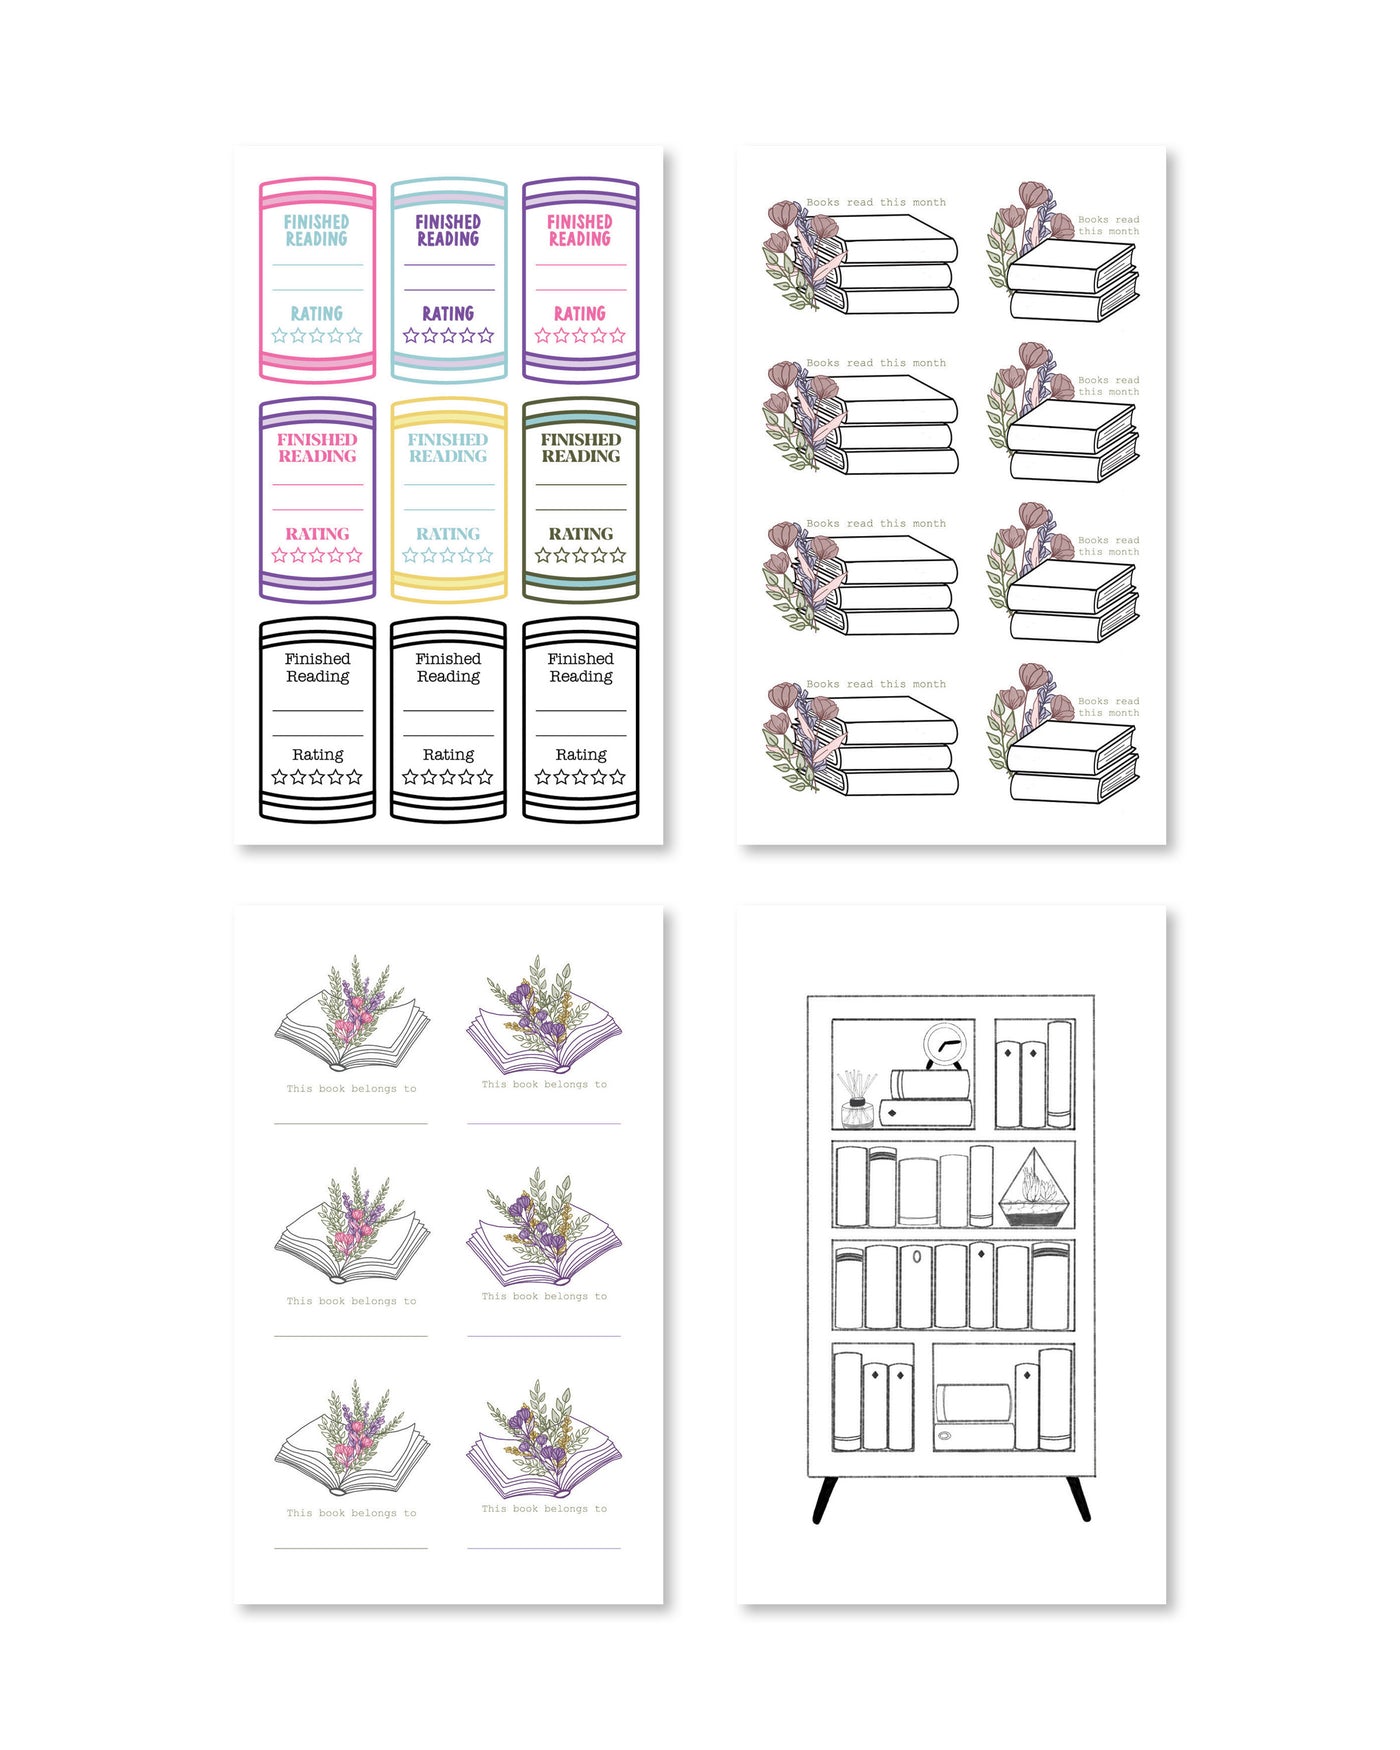 Rainbow Planner Sticker Book | Functional Stickers | Shop Rongrong